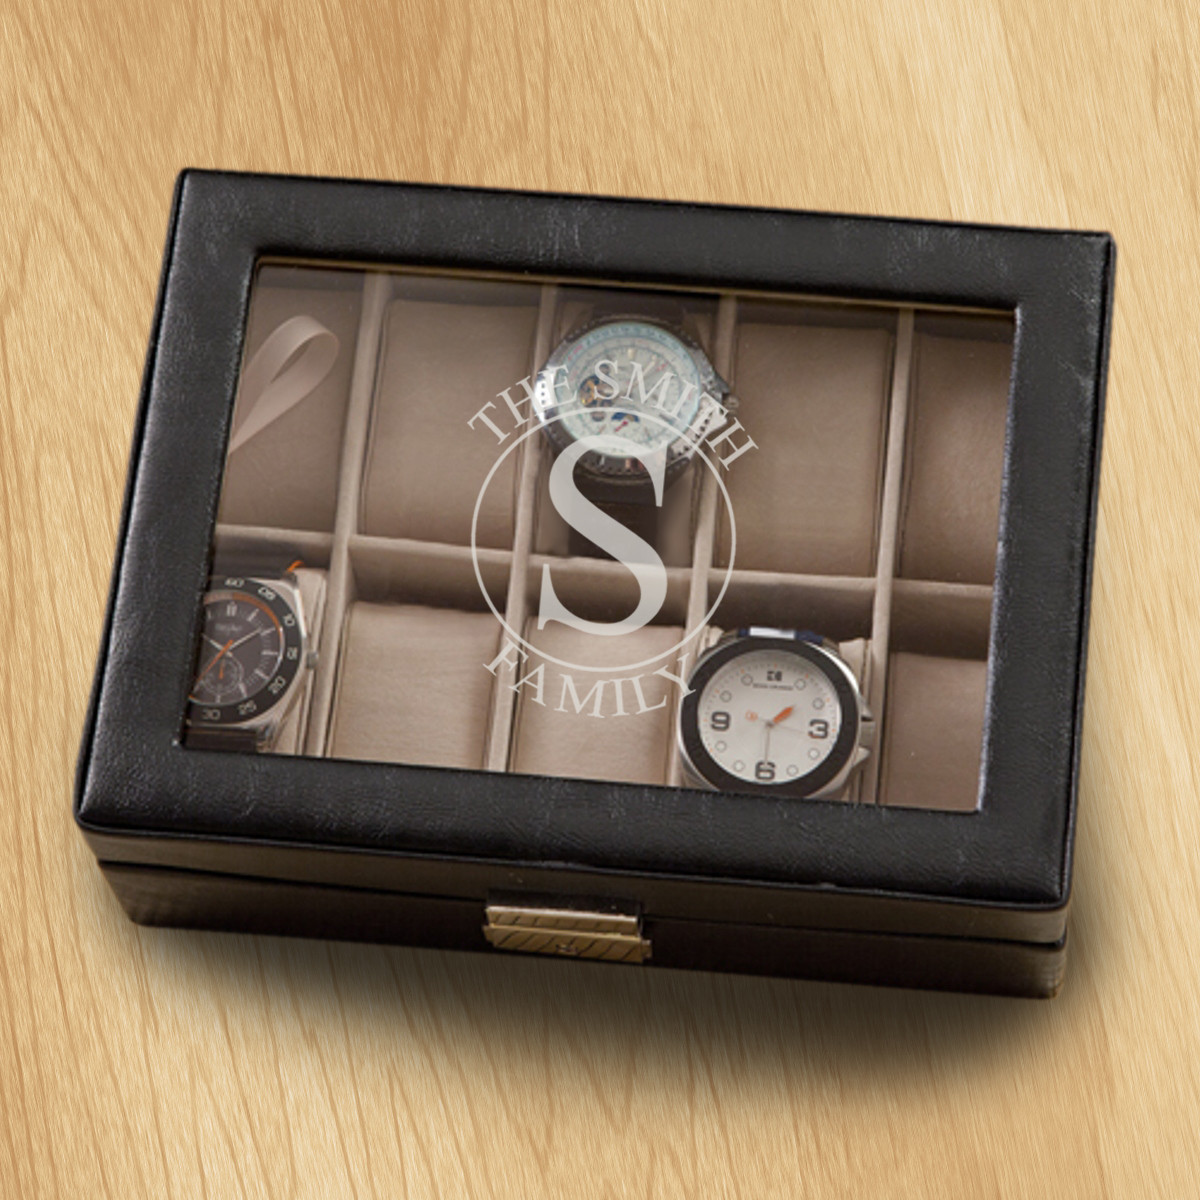 This leather watch box container features a stamped monogram on its glass lid that can be personalized. It features sectioned compartments. Storing wristwatches in a comfortable manner is made possible by this leather watch case exhibiting a customized s #luxury